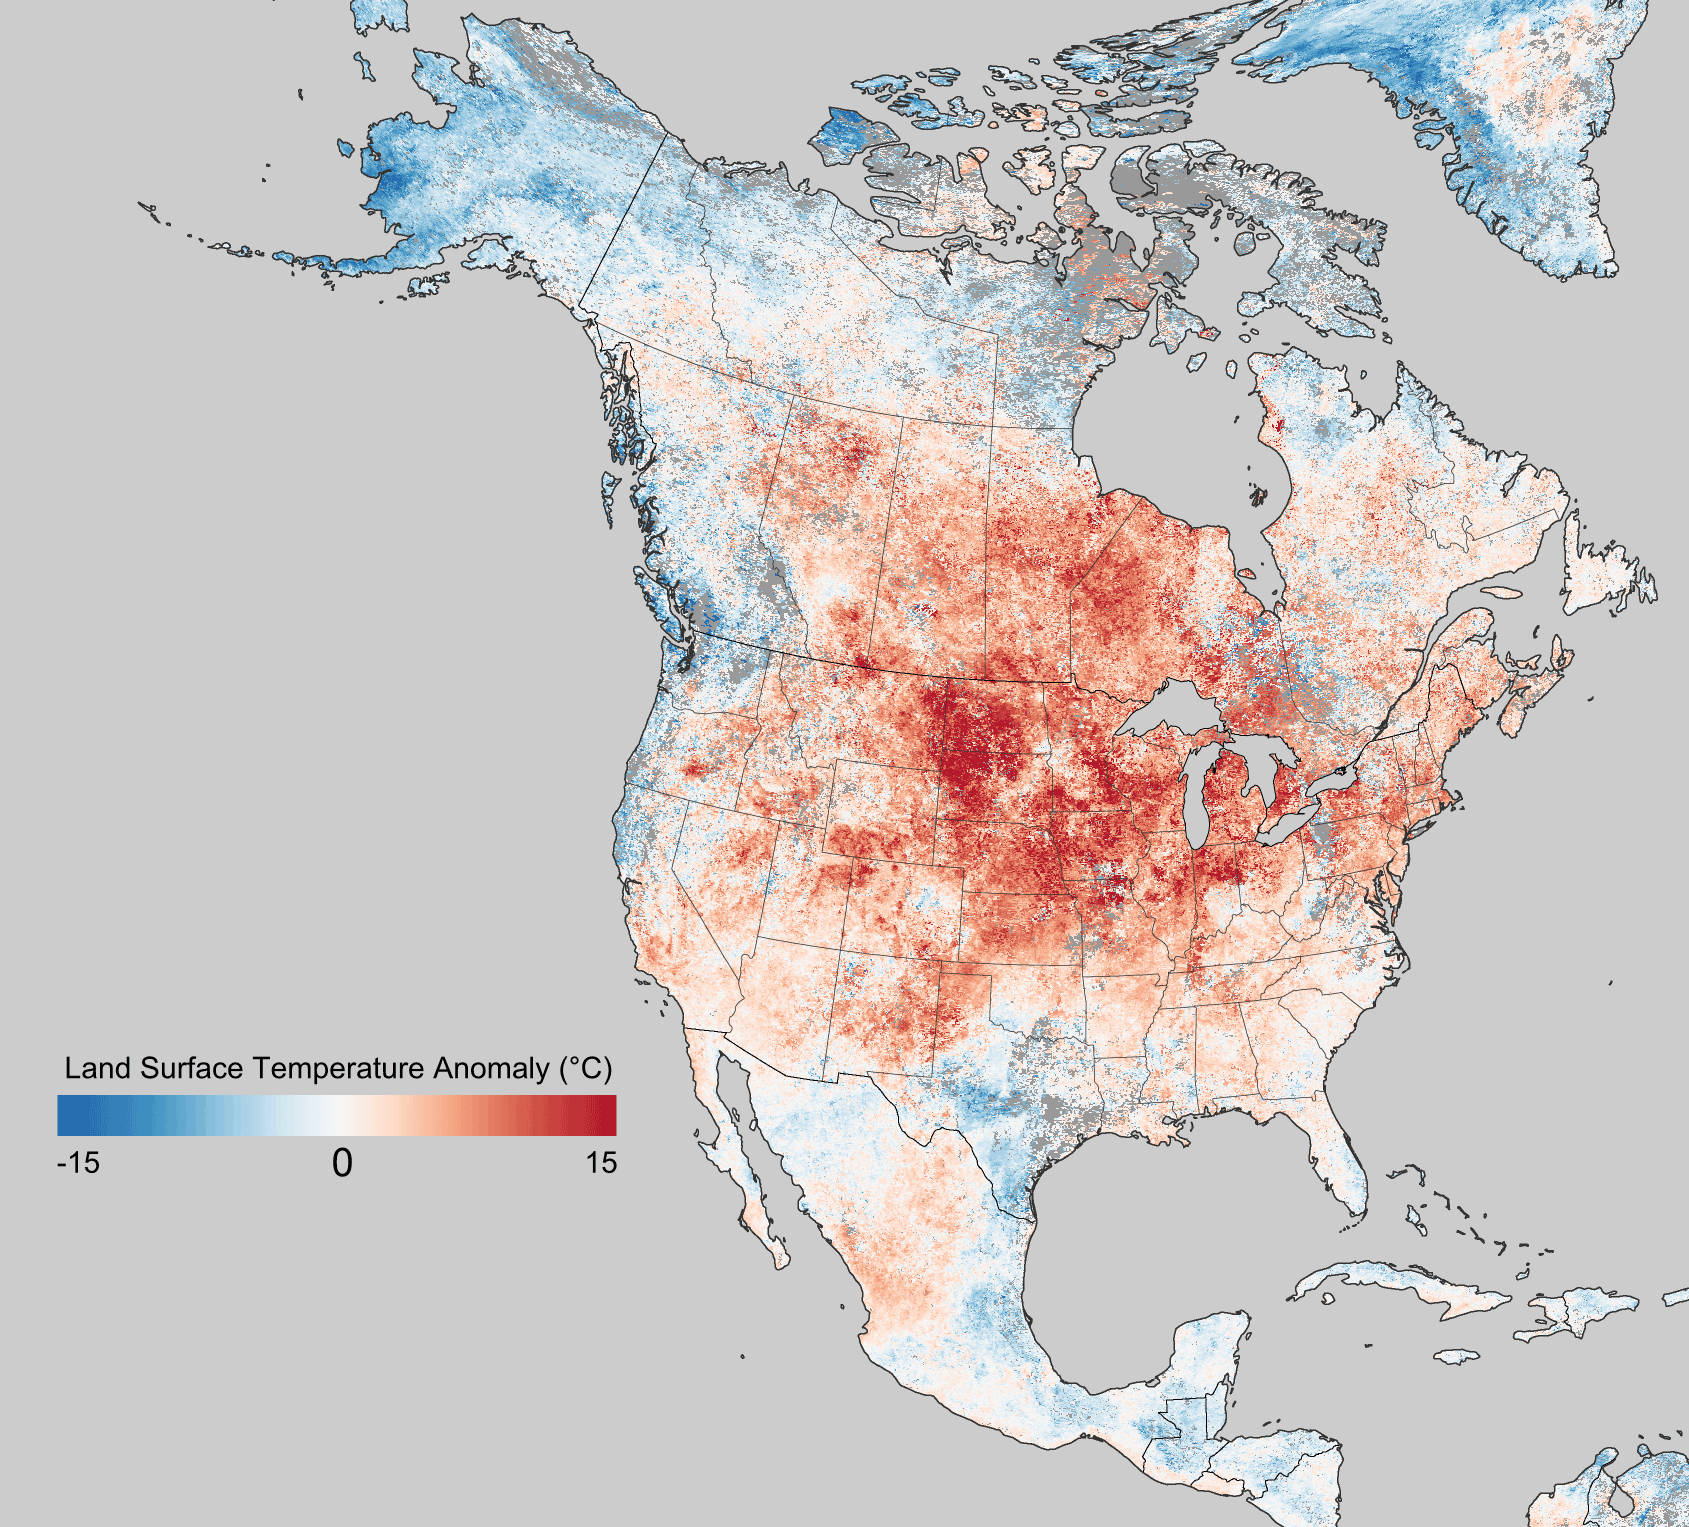 Map of North America showing land surface temperature anomalies in March 2011. They were especially above average in the Dakotas, Nebraska, and upper Midwest.